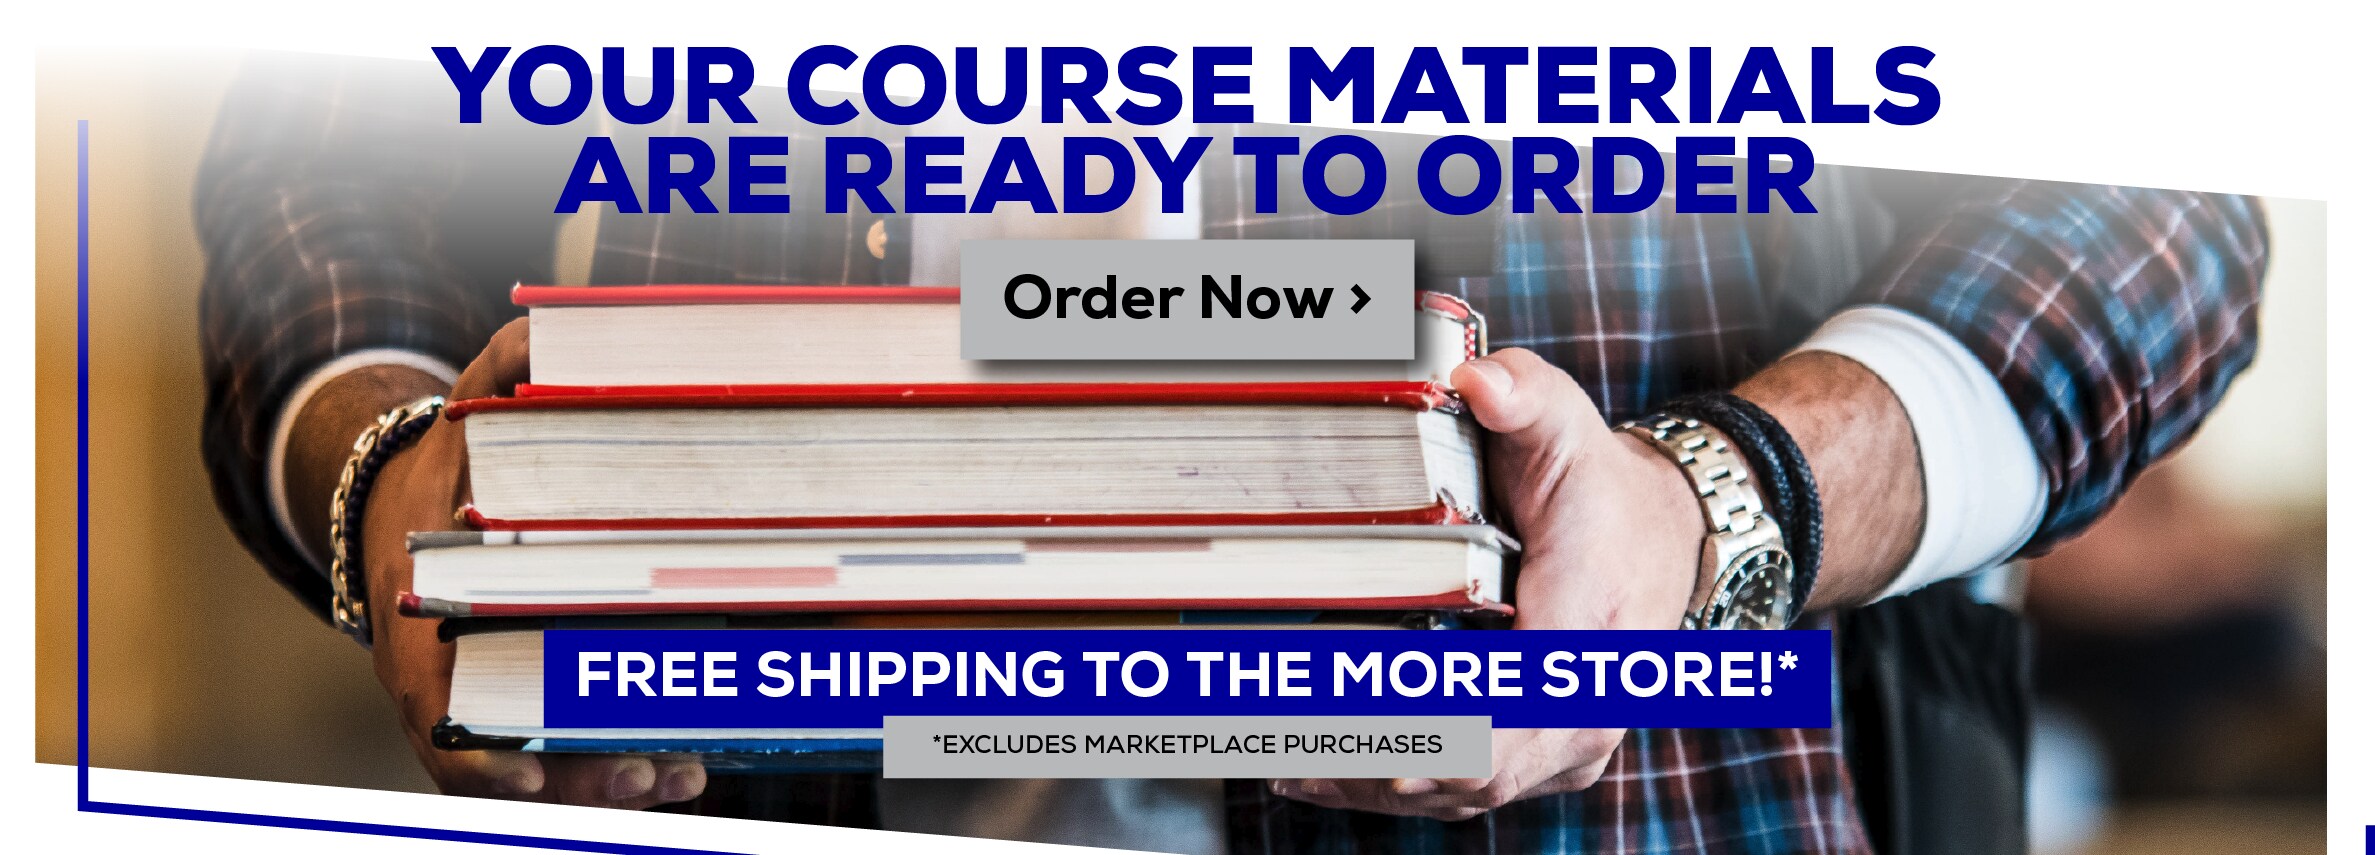 Your Course Materials are Ready to Order. Order Now. Free shipping to the More Store! *Excludes marketplace purchases.